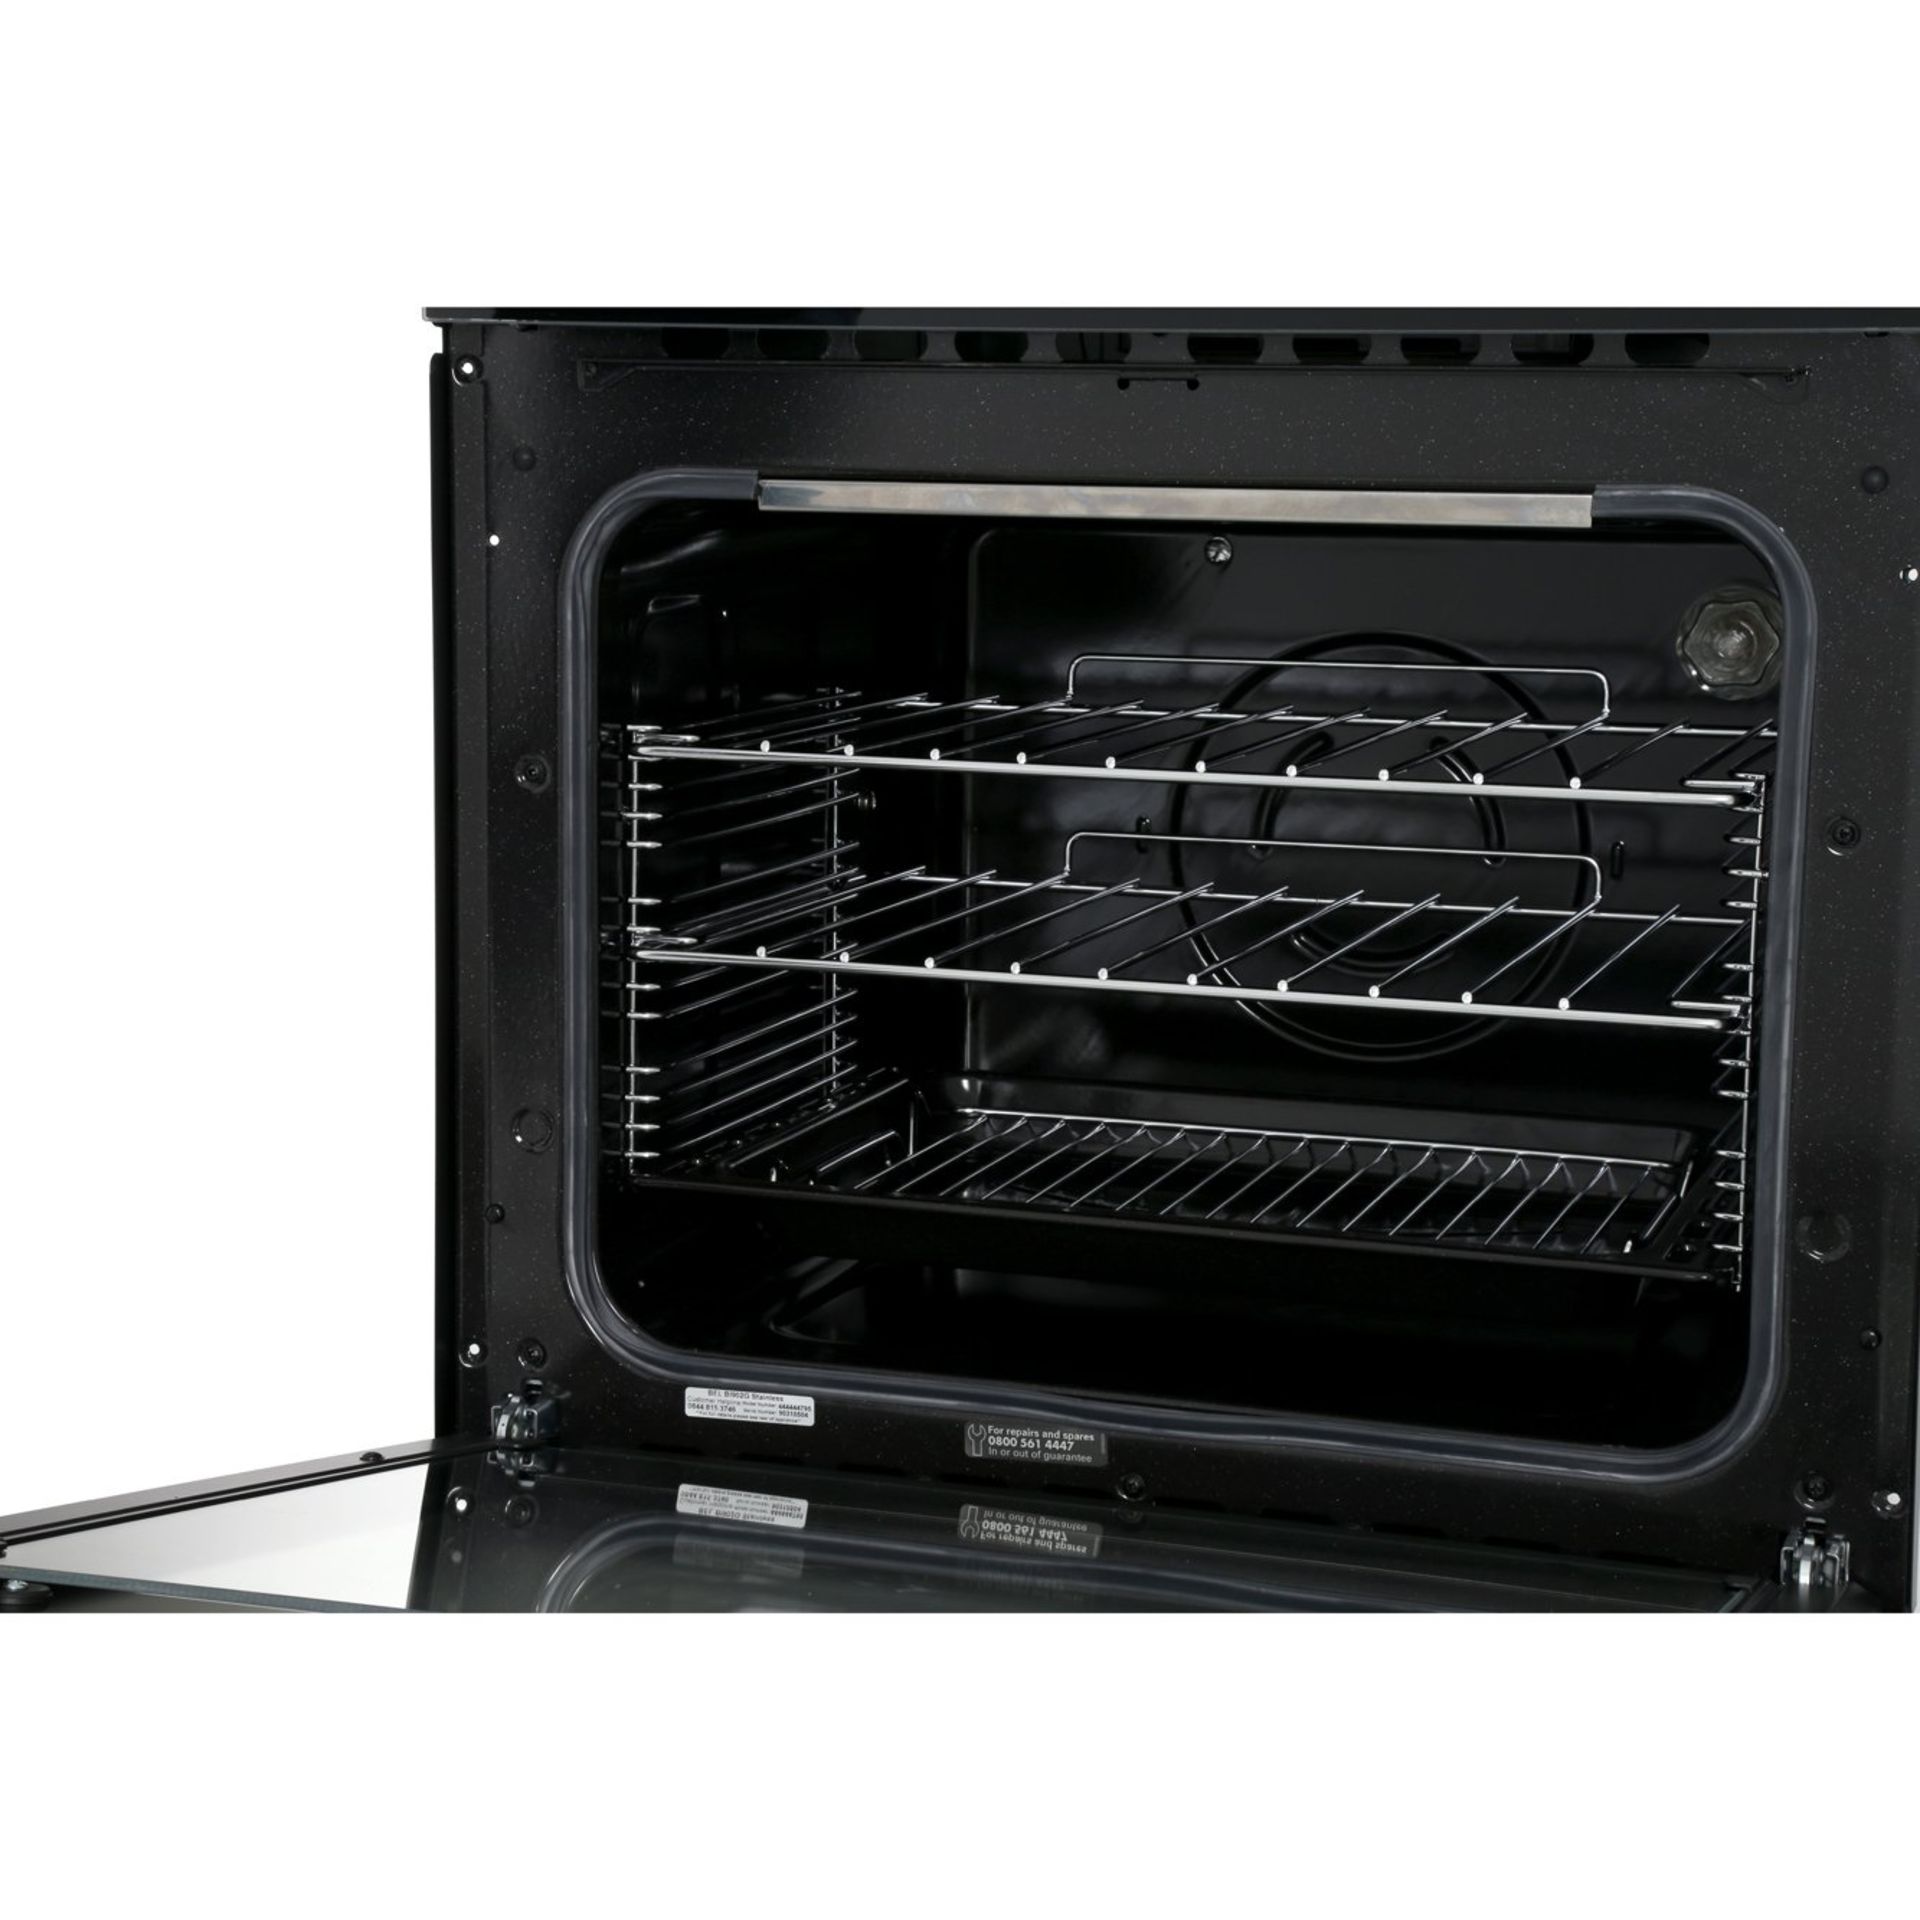 Grade B Belling BI902G Built-In Gas Oven, A/A Energy Rating, Stainless Steel in Black - Image 5 of 6